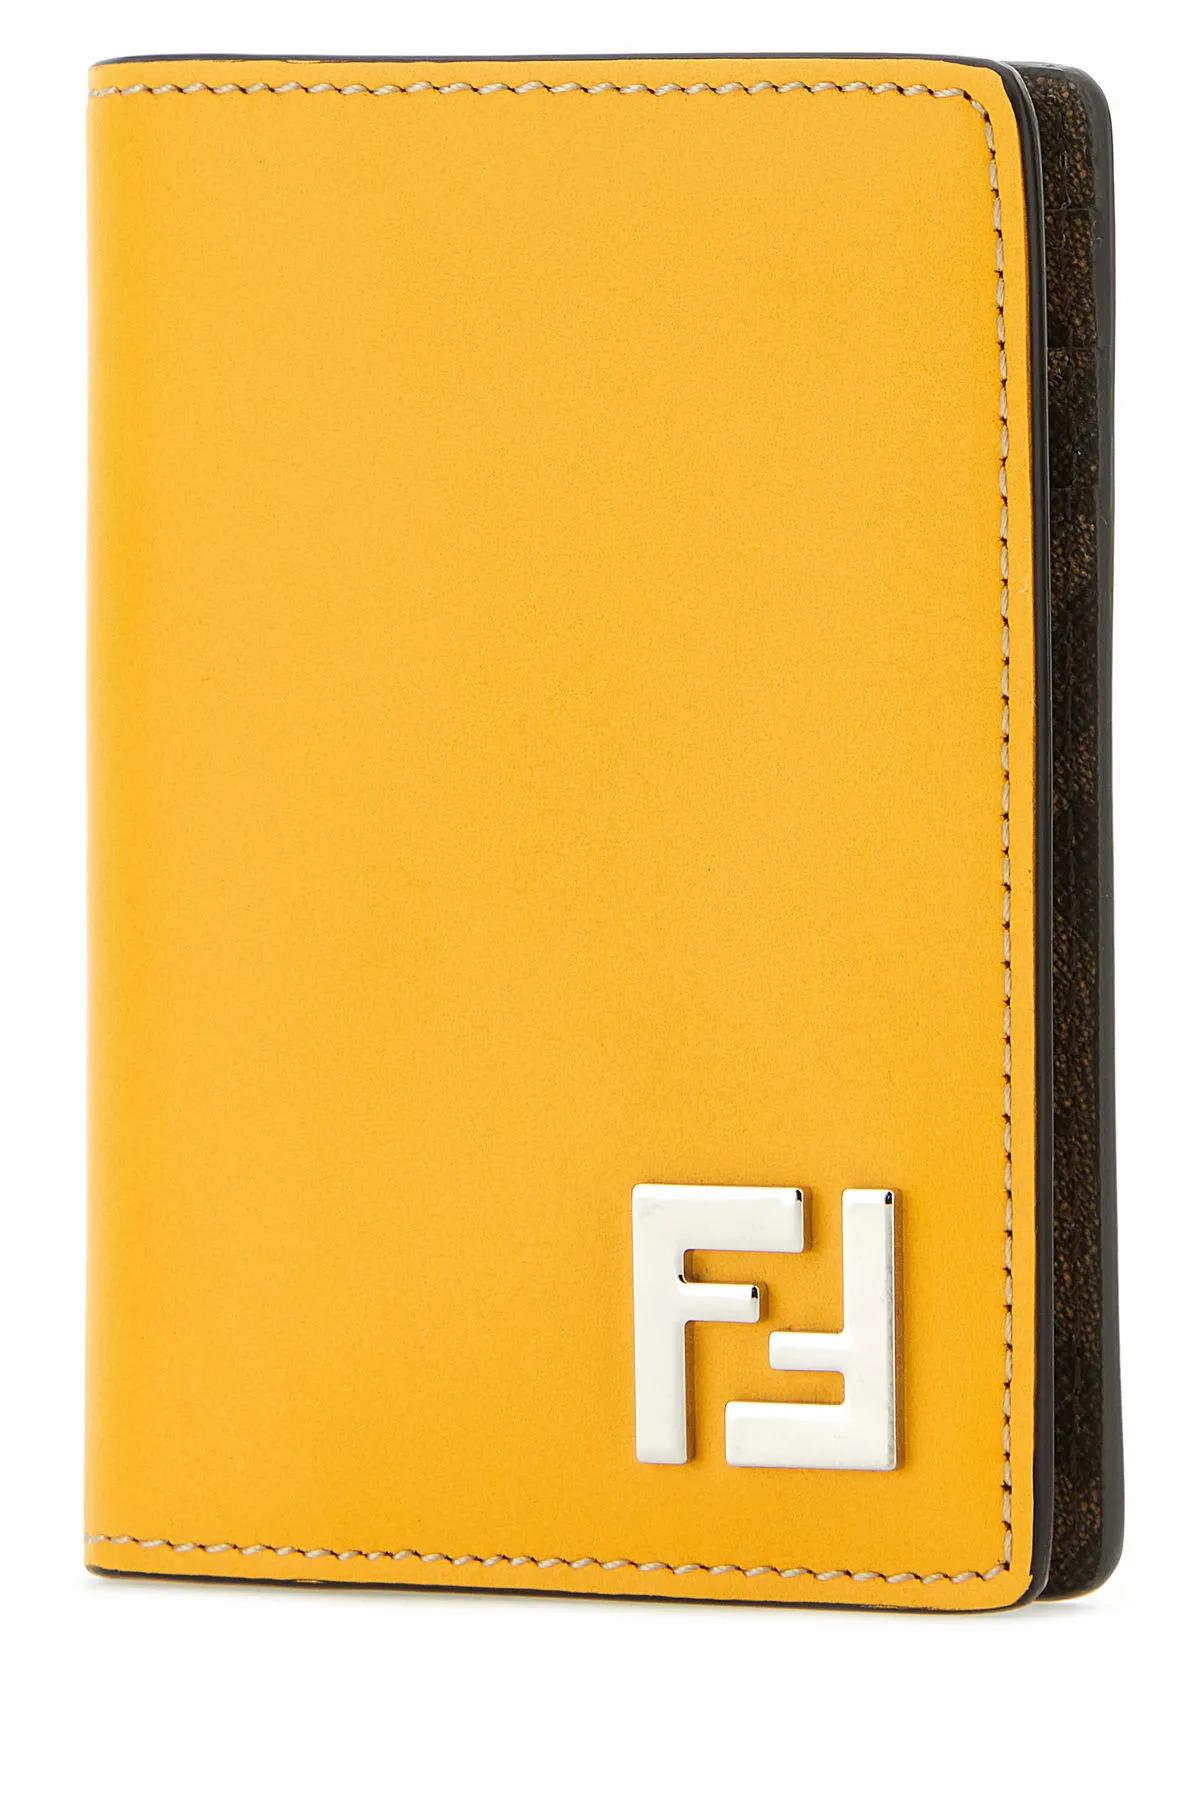 Fendi Yellow Leather Gusseted Card Holder — LSC INC